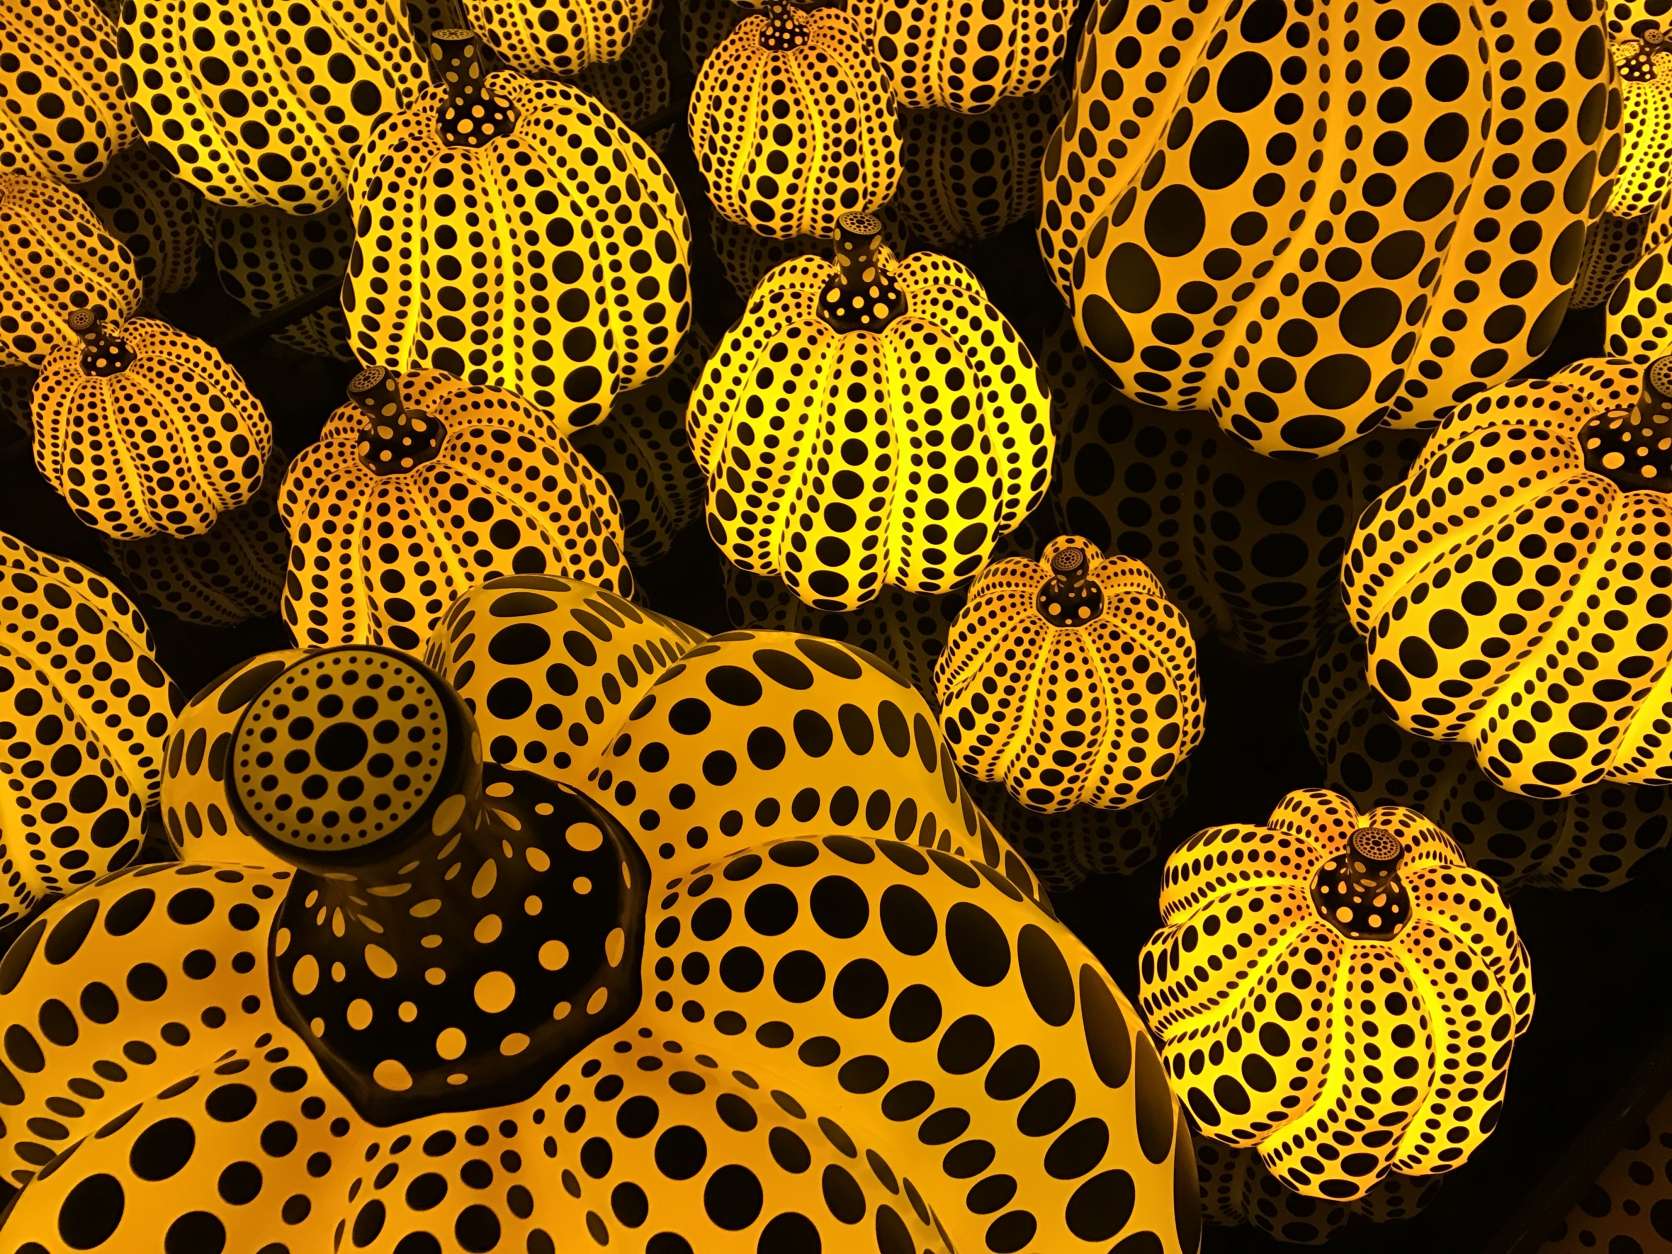 One of the Mirrored Rooms in the installation is a field of handpainted glowing pumpkins. Each visitors is allowed inside for 30 seconds to experience the infinity effect. (WTOP/Megan Cloherty) 